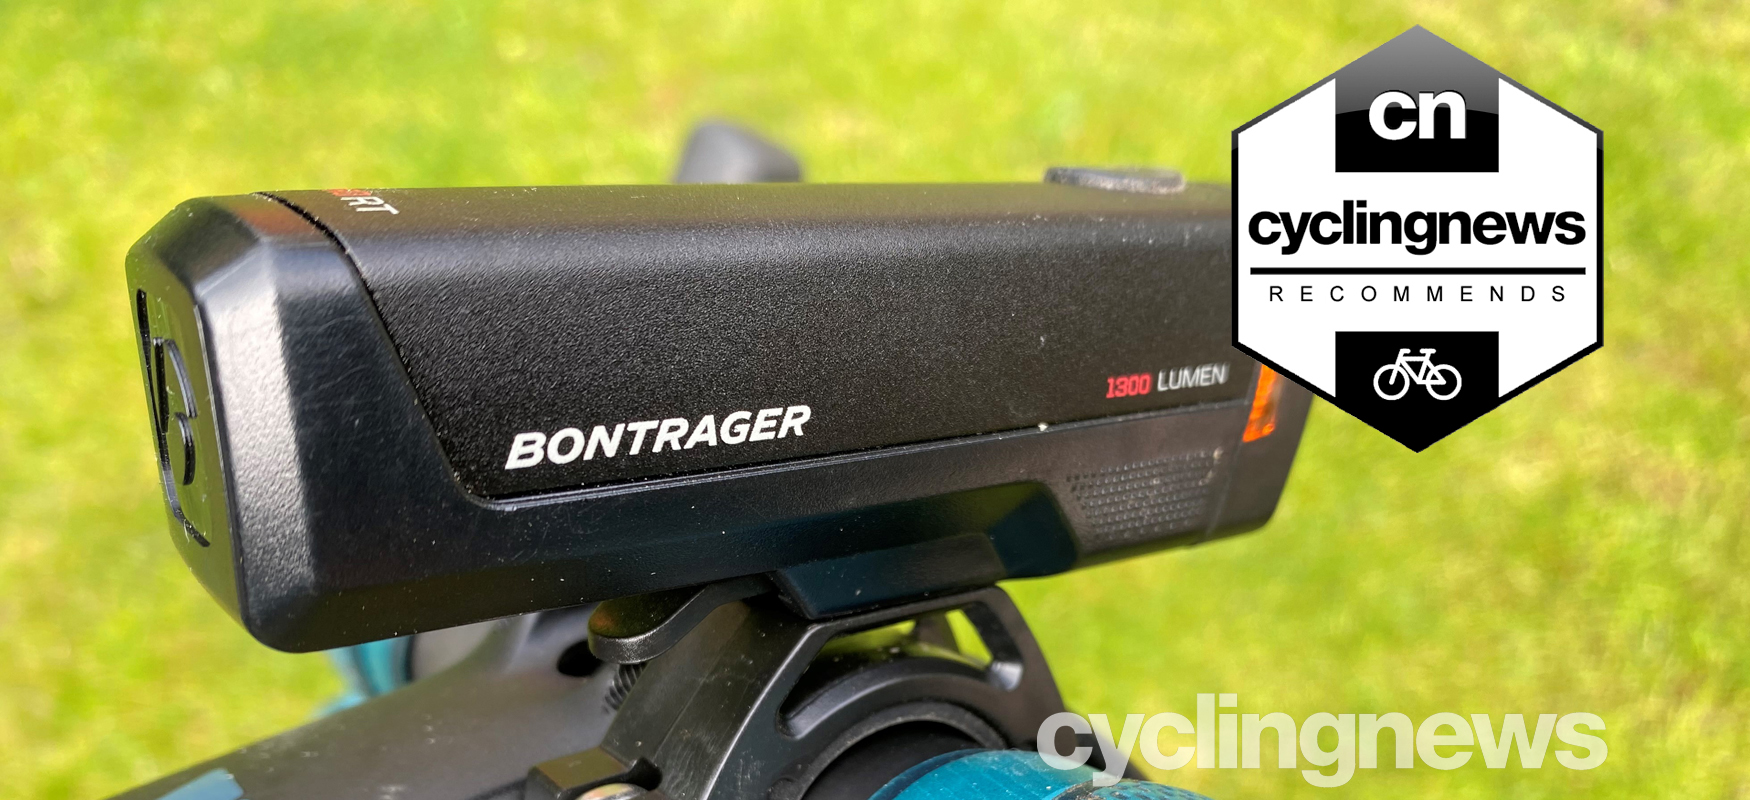 Bontrager Ion Pro RT 1300 light review | Cyclingnews